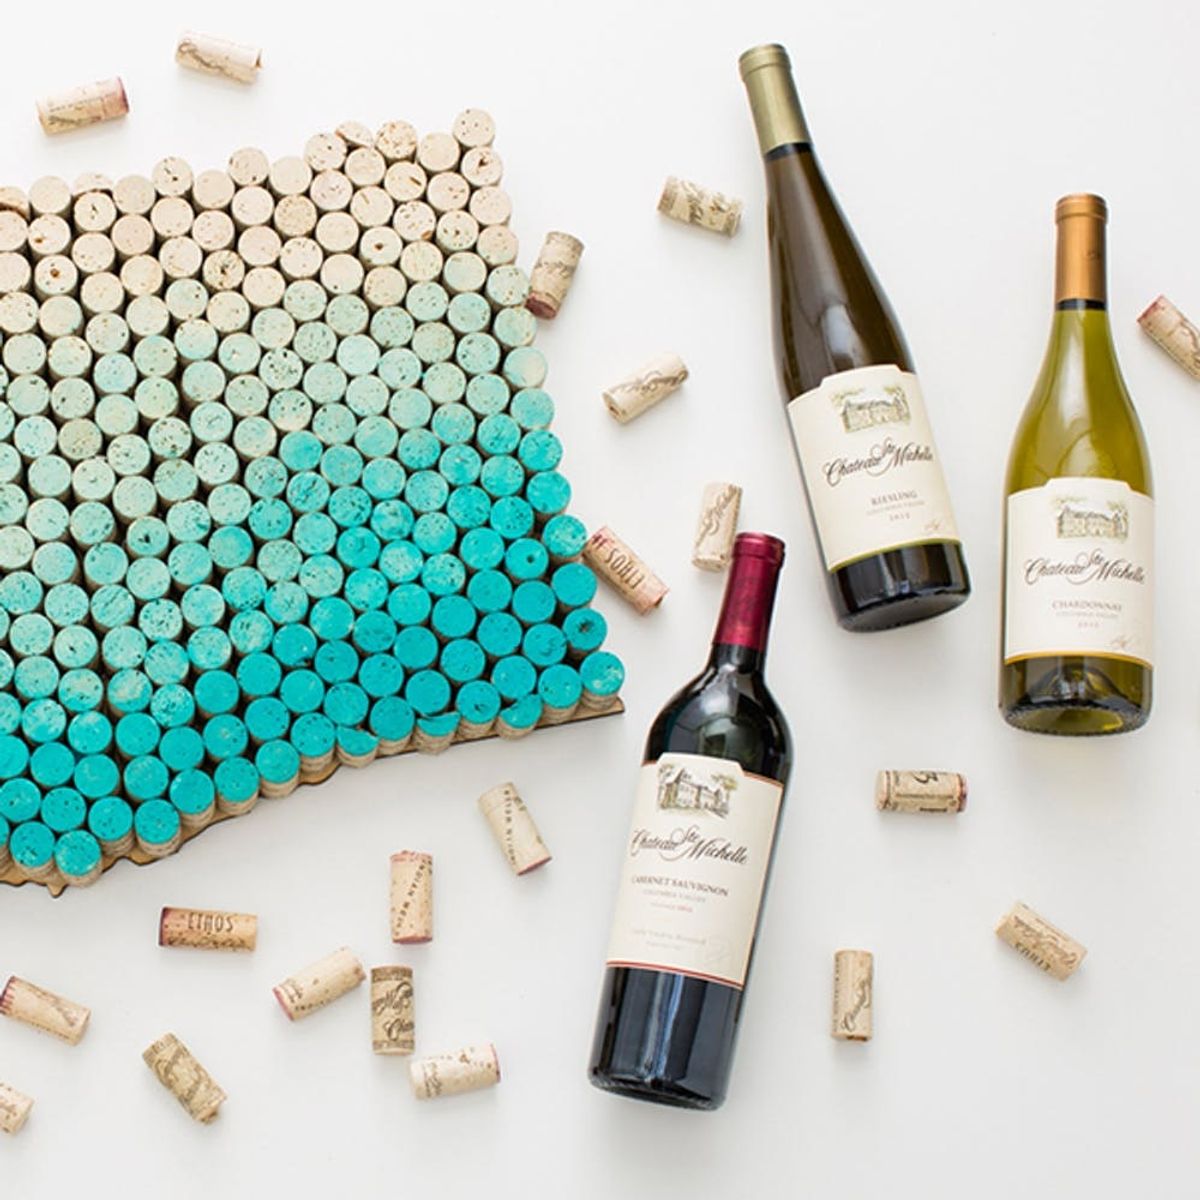 12 Essential Wine Hacks You Need for This/Every Weekend